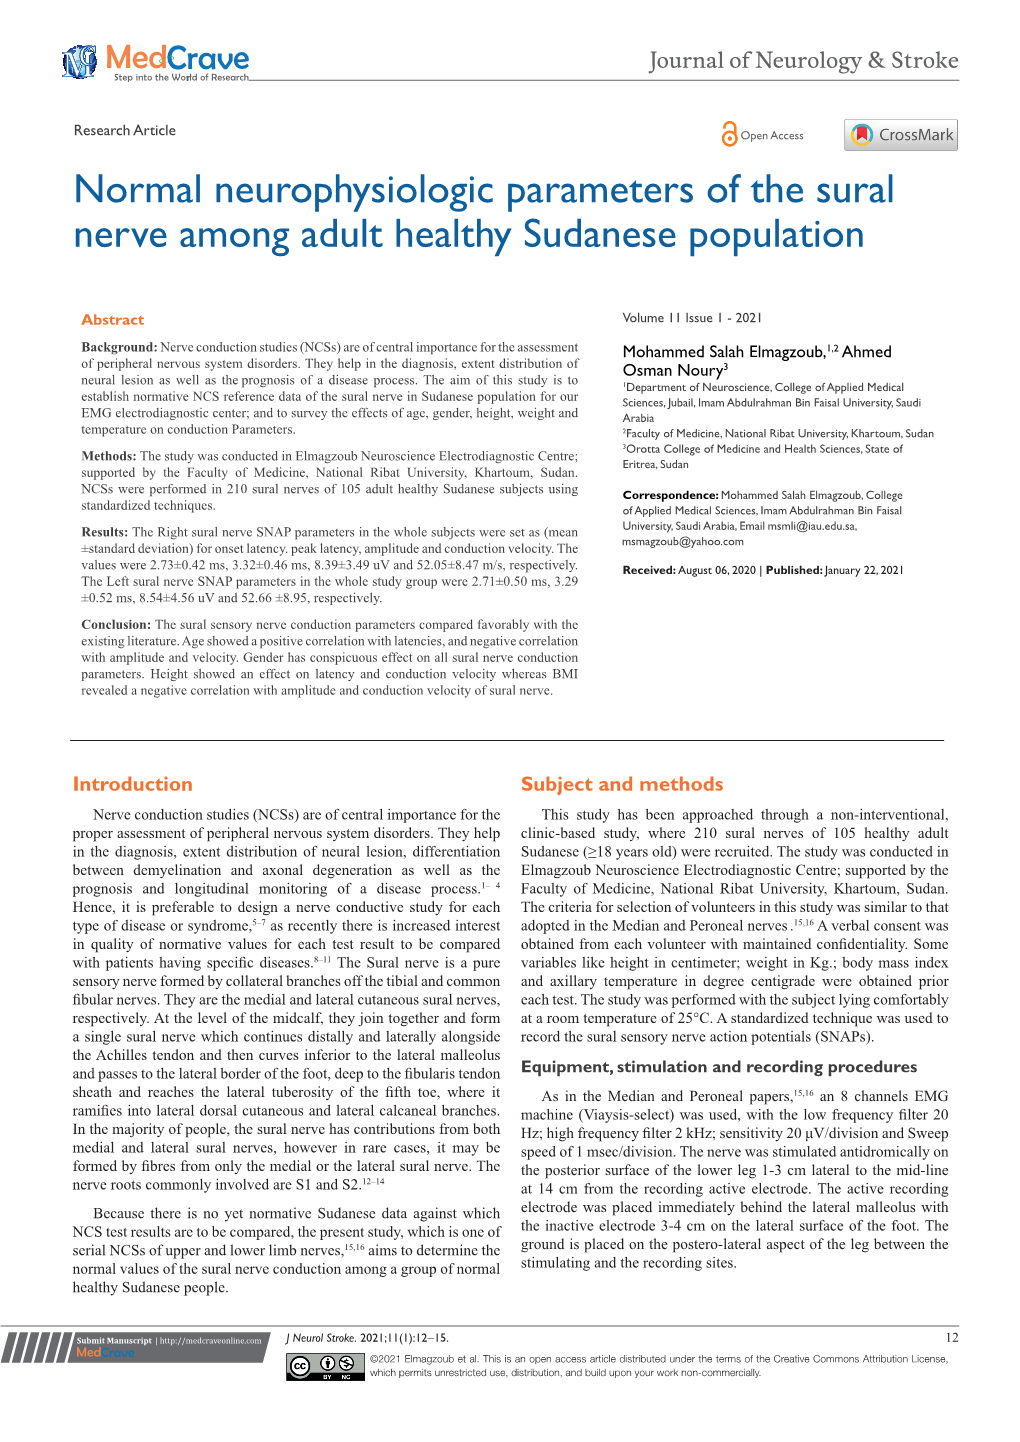 Normal Neurophysiologic Parameters of the Sural Nerve Among Adult Healthy Sudanese Population